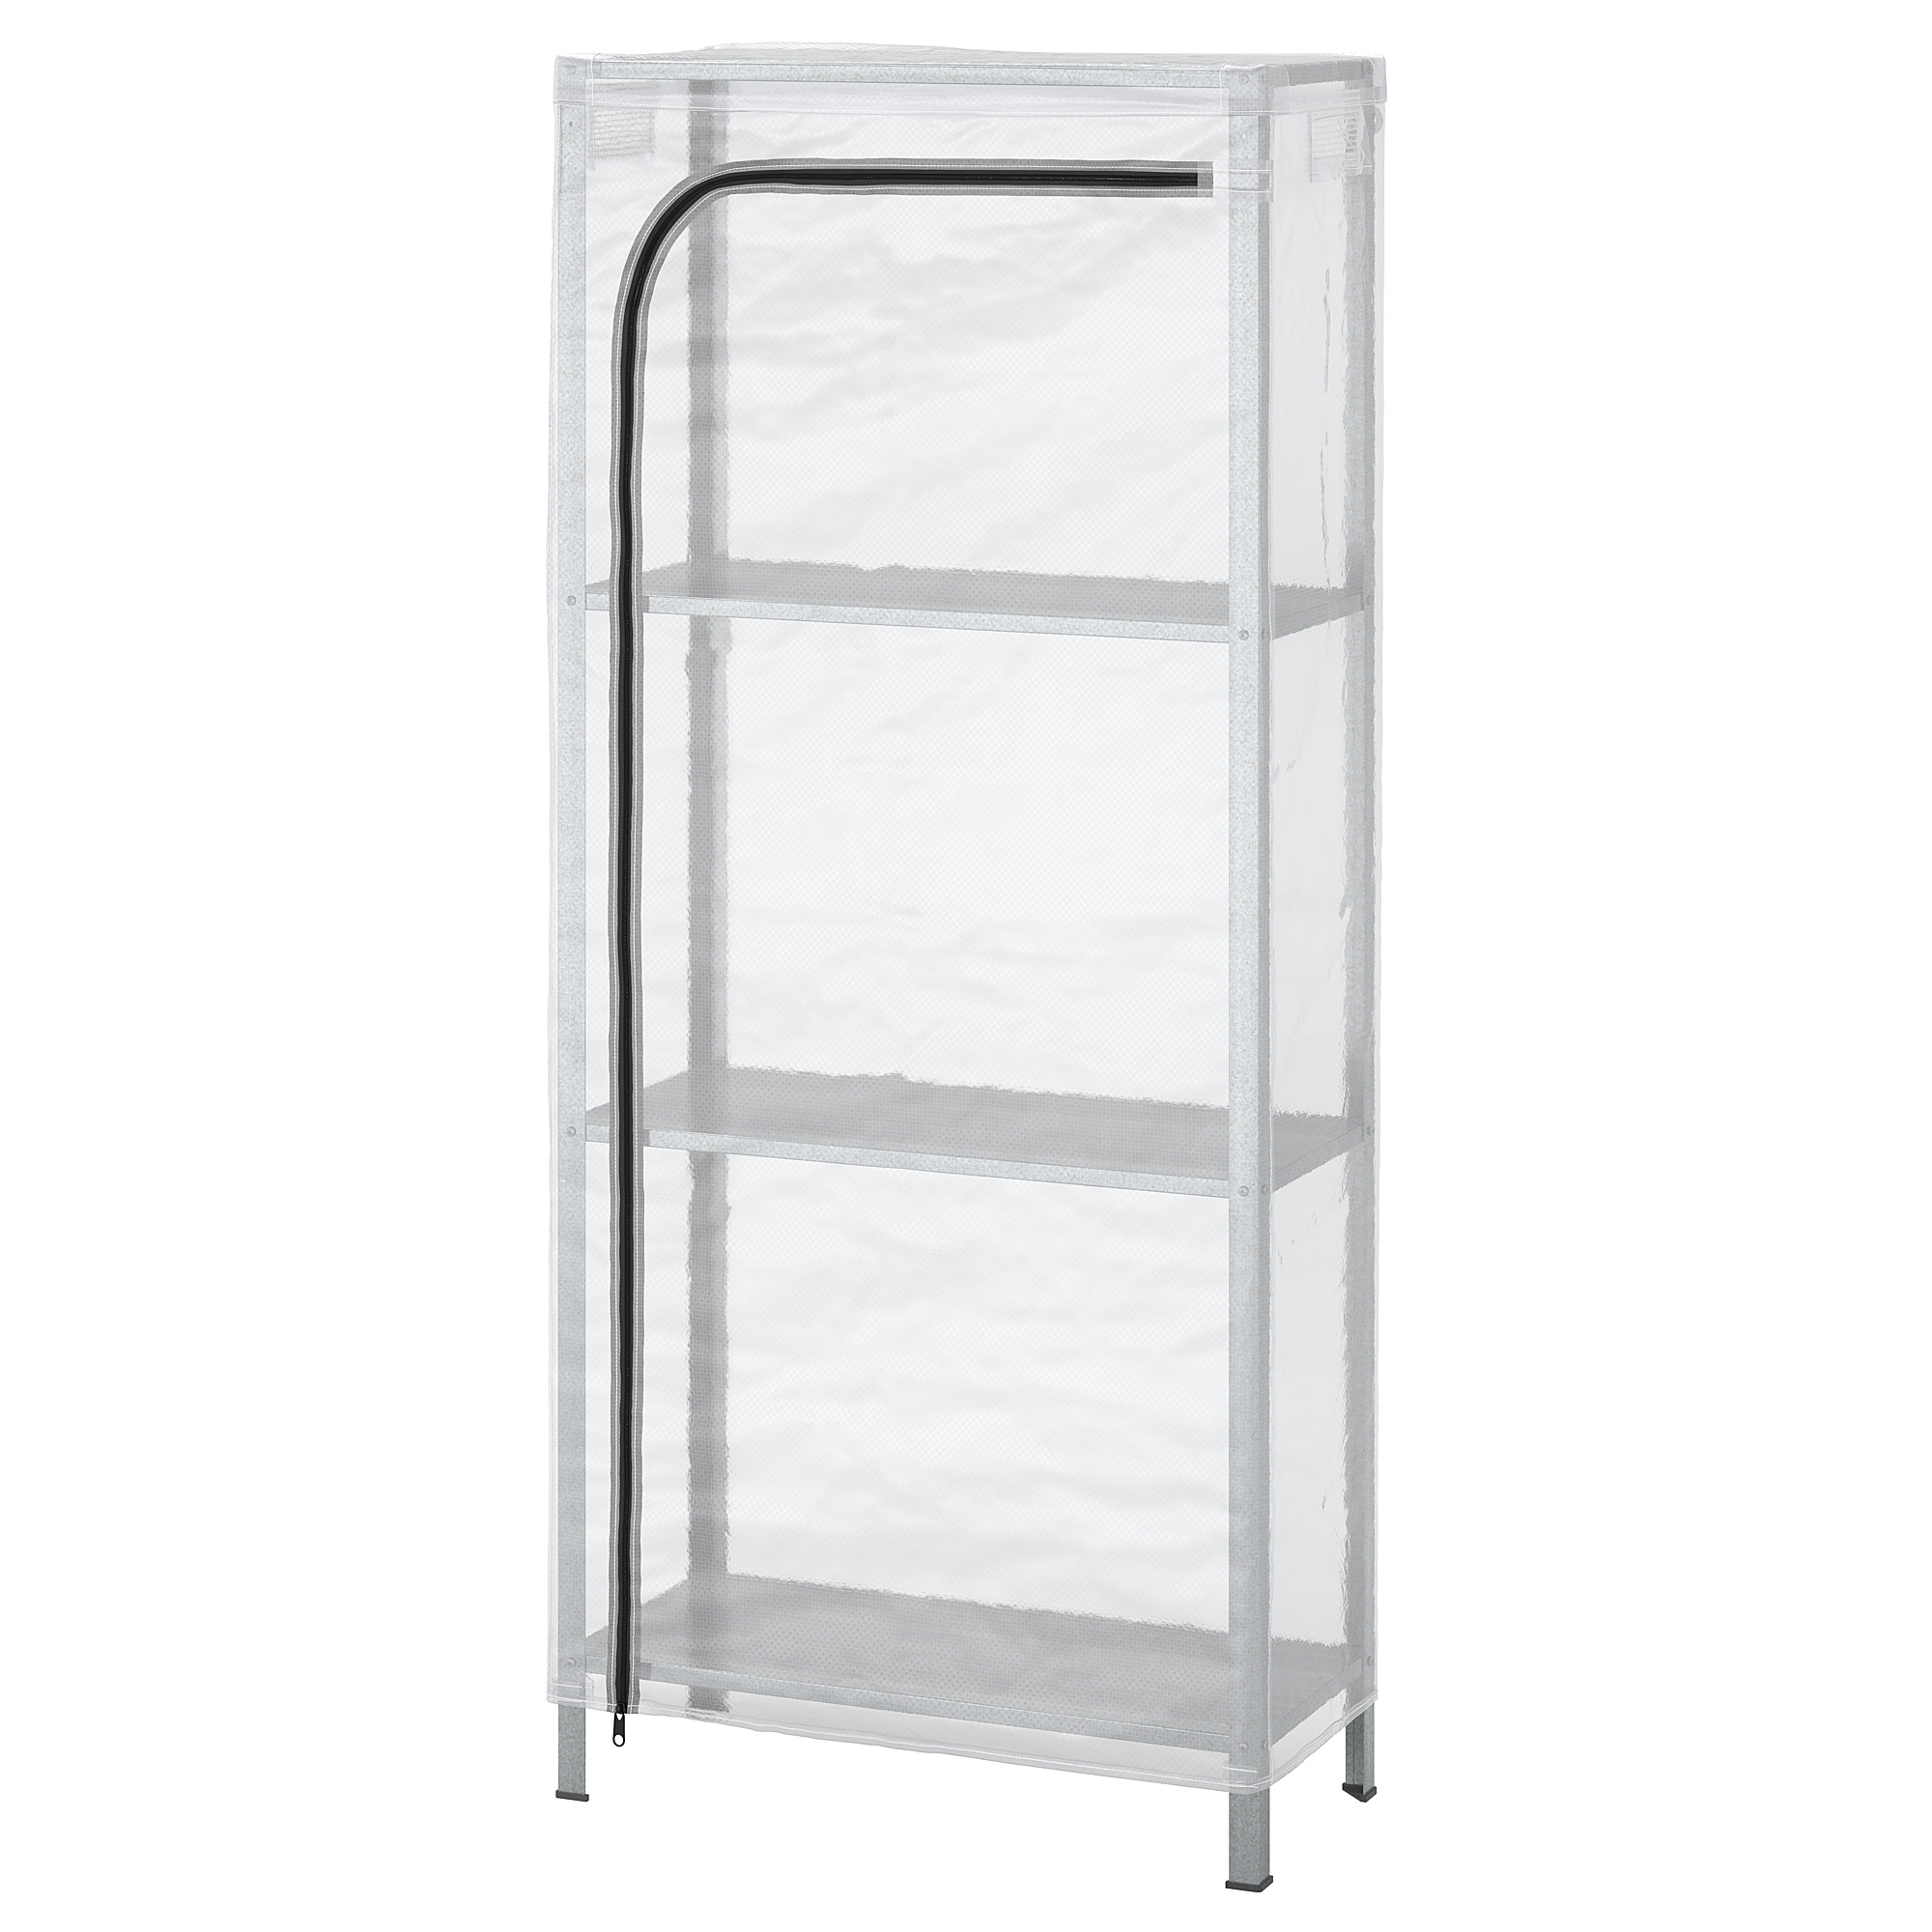 HYLLIS shelving unit with cover